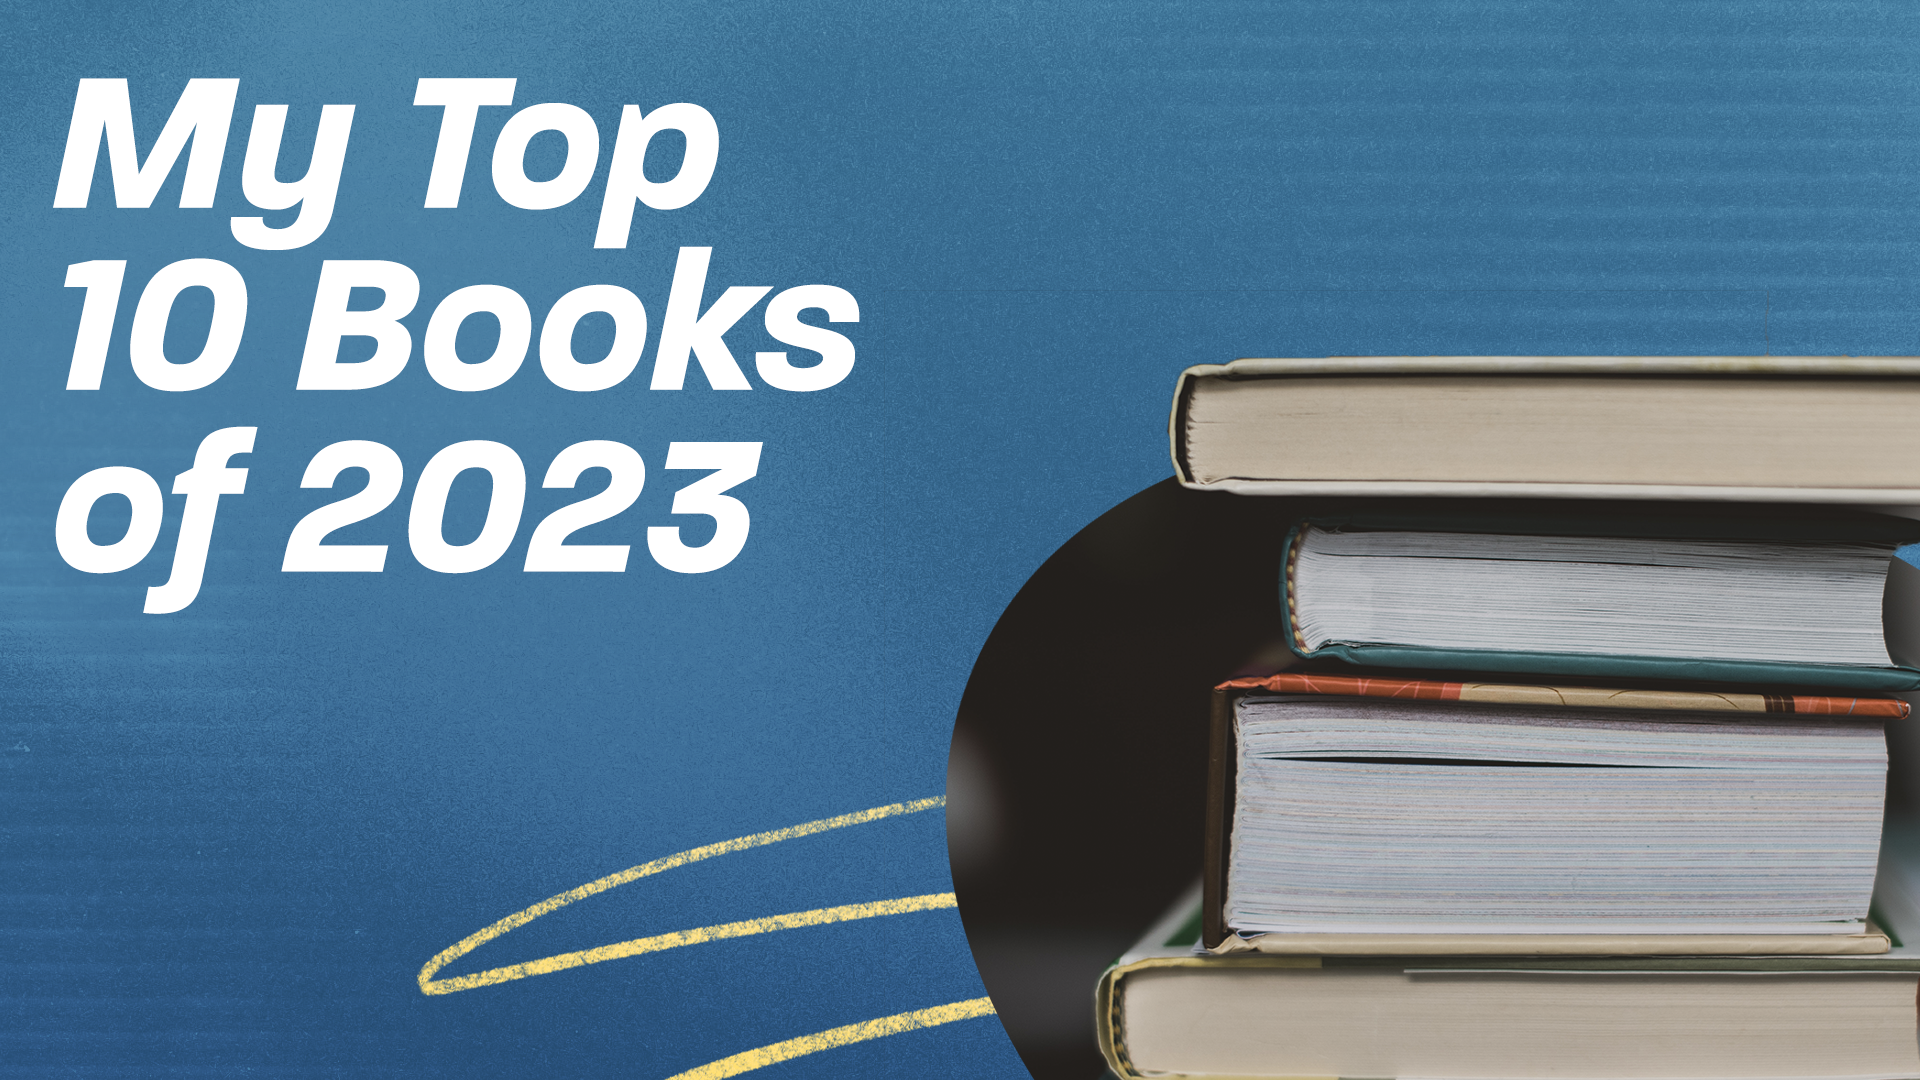 My Top 10 Books of 2023